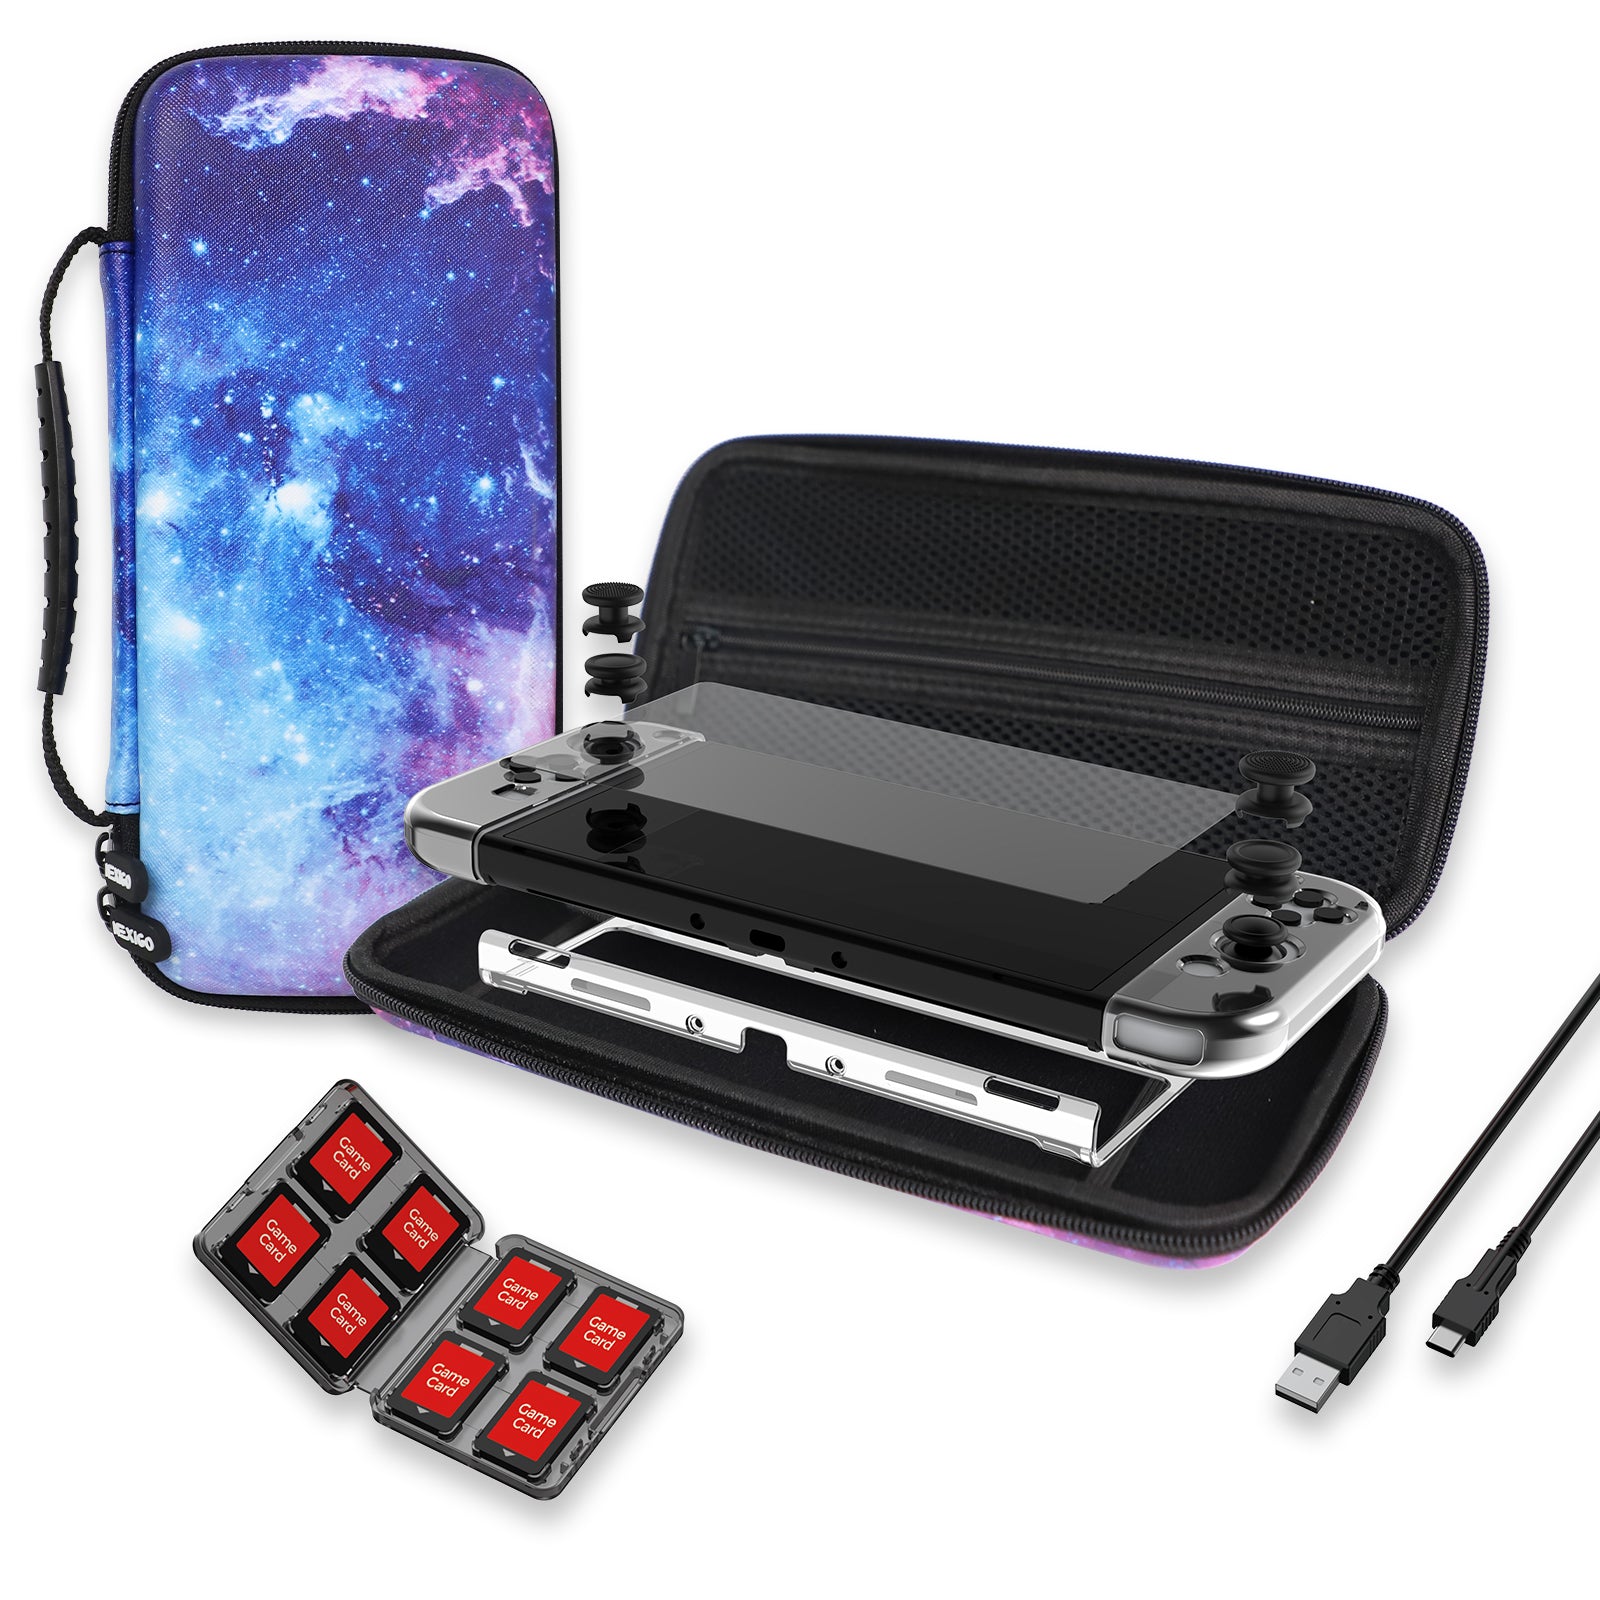 Galaxy Carry Case for Switch OLED with screen protector, charging cable, Thumbstick Caps.